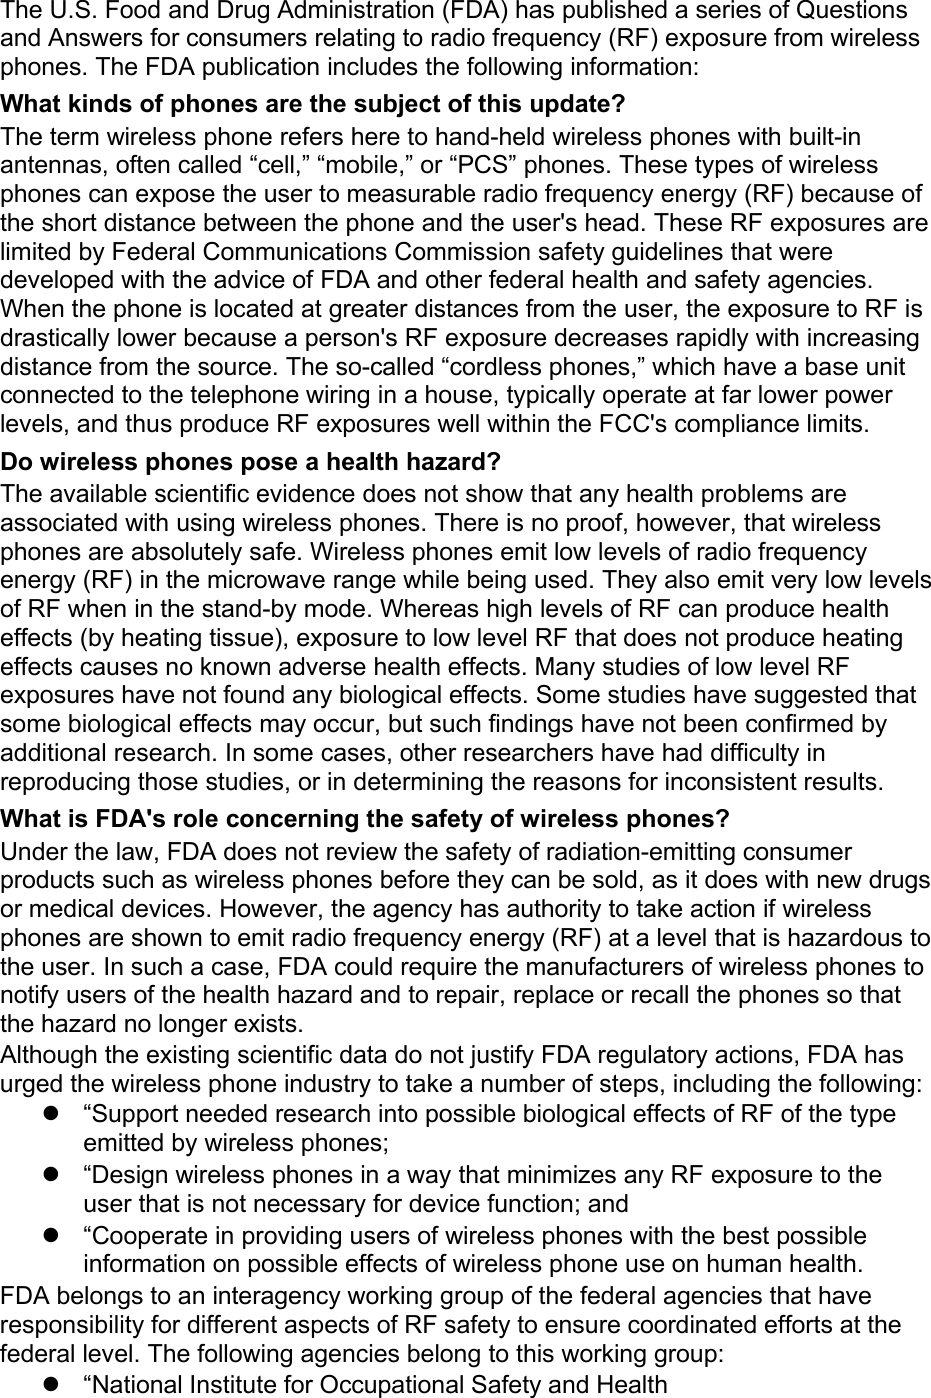 The U.S. Food and Drug Administration (FDA) has published a series of Questions and Answers for consumers relating to radio frequency (RF) exposure from wireless phones. The FDA publication includes the following information: What kinds of phones are the subject of this update? The term wireless phone refers here to hand-held wireless phones with built-in antennas, often called “cell,” “mobile,” or “PCS” phones. These types of wireless phones can expose the user to measurable radio frequency energy (RF) because of the short distance between the phone and the user&apos;s head. These RF exposures are limited by Federal Communications Commission safety guidelines that were developed with the advice of FDA and other federal health and safety agencies. When the phone is located at greater distances from the user, the exposure to RF is drastically lower because a person&apos;s RF exposure decreases rapidly with increasing distance from the source. The so-called “cordless phones,” which have a base unit connected to the telephone wiring in a house, typically operate at far lower power levels, and thus produce RF exposures well within the FCC&apos;s compliance limits. Do wireless phones pose a health hazard? The available scientific evidence does not show that any health problems are associated with using wireless phones. There is no proof, however, that wireless phones are absolutely safe. Wireless phones emit low levels of radio frequency energy (RF) in the microwave range while being used. They also emit very low levels of RF when in the stand-by mode. Whereas high levels of RF can produce health effects (by heating tissue), exposure to low level RF that does not produce heating effects causes no known adverse health effects. Many studies of low level RF exposures have not found any biological effects. Some studies have suggested that some biological effects may occur, but such findings have not been confirmed by additional research. In some cases, other researchers have had difficulty in reproducing those studies, or in determining the reasons for inconsistent results. What is FDA&apos;s role concerning the safety of wireless phones? Under the law, FDA does not review the safety of radiation-emitting consumer products such as wireless phones before they can be sold, as it does with new drugs or medical devices. However, the agency has authority to take action if wireless phones are shown to emit radio frequency energy (RF) at a level that is hazardous to the user. In such a case, FDA could require the manufacturers of wireless phones to notify users of the health hazard and to repair, replace or recall the phones so that the hazard no longer exists. Although the existing scientific data do not justify FDA regulatory actions, FDA has urged the wireless phone industry to take a number of steps, including the following:   “Support needed research into possible biological effects of RF of the type emitted by wireless phones;   “Design wireless phones in a way that minimizes any RF exposure to the user that is not necessary for device function; and   “Cooperate in providing users of wireless phones with the best possible information on possible effects of wireless phone use on human health. FDA belongs to an interagency working group of the federal agencies that have responsibility for different aspects of RF safety to ensure coordinated efforts at the federal level. The following agencies belong to this working group:   “National Institute for Occupational Safety and Health 